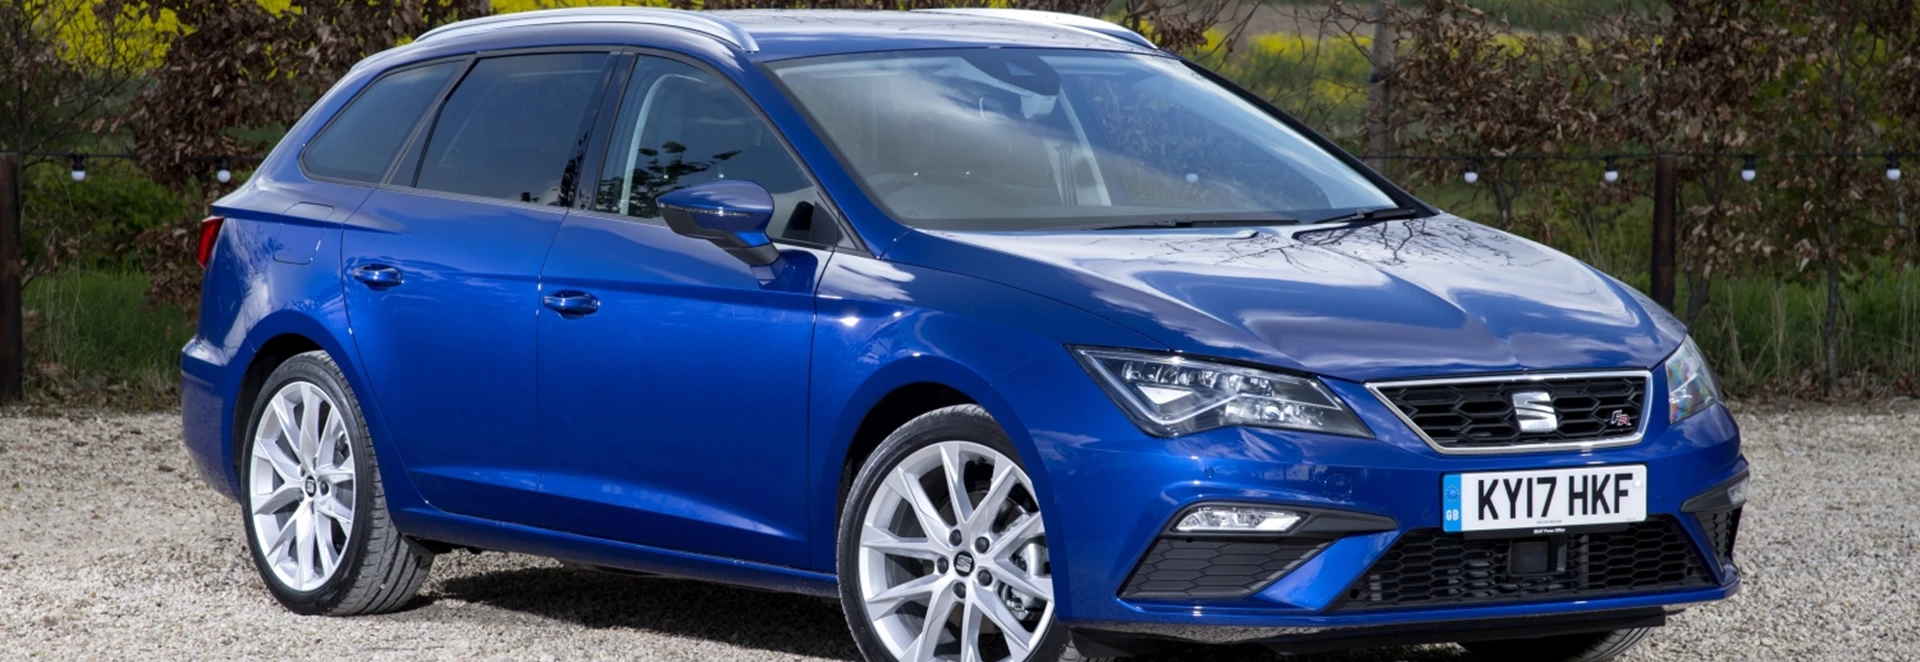 Buyer’s guide to the Seat Leon Estate